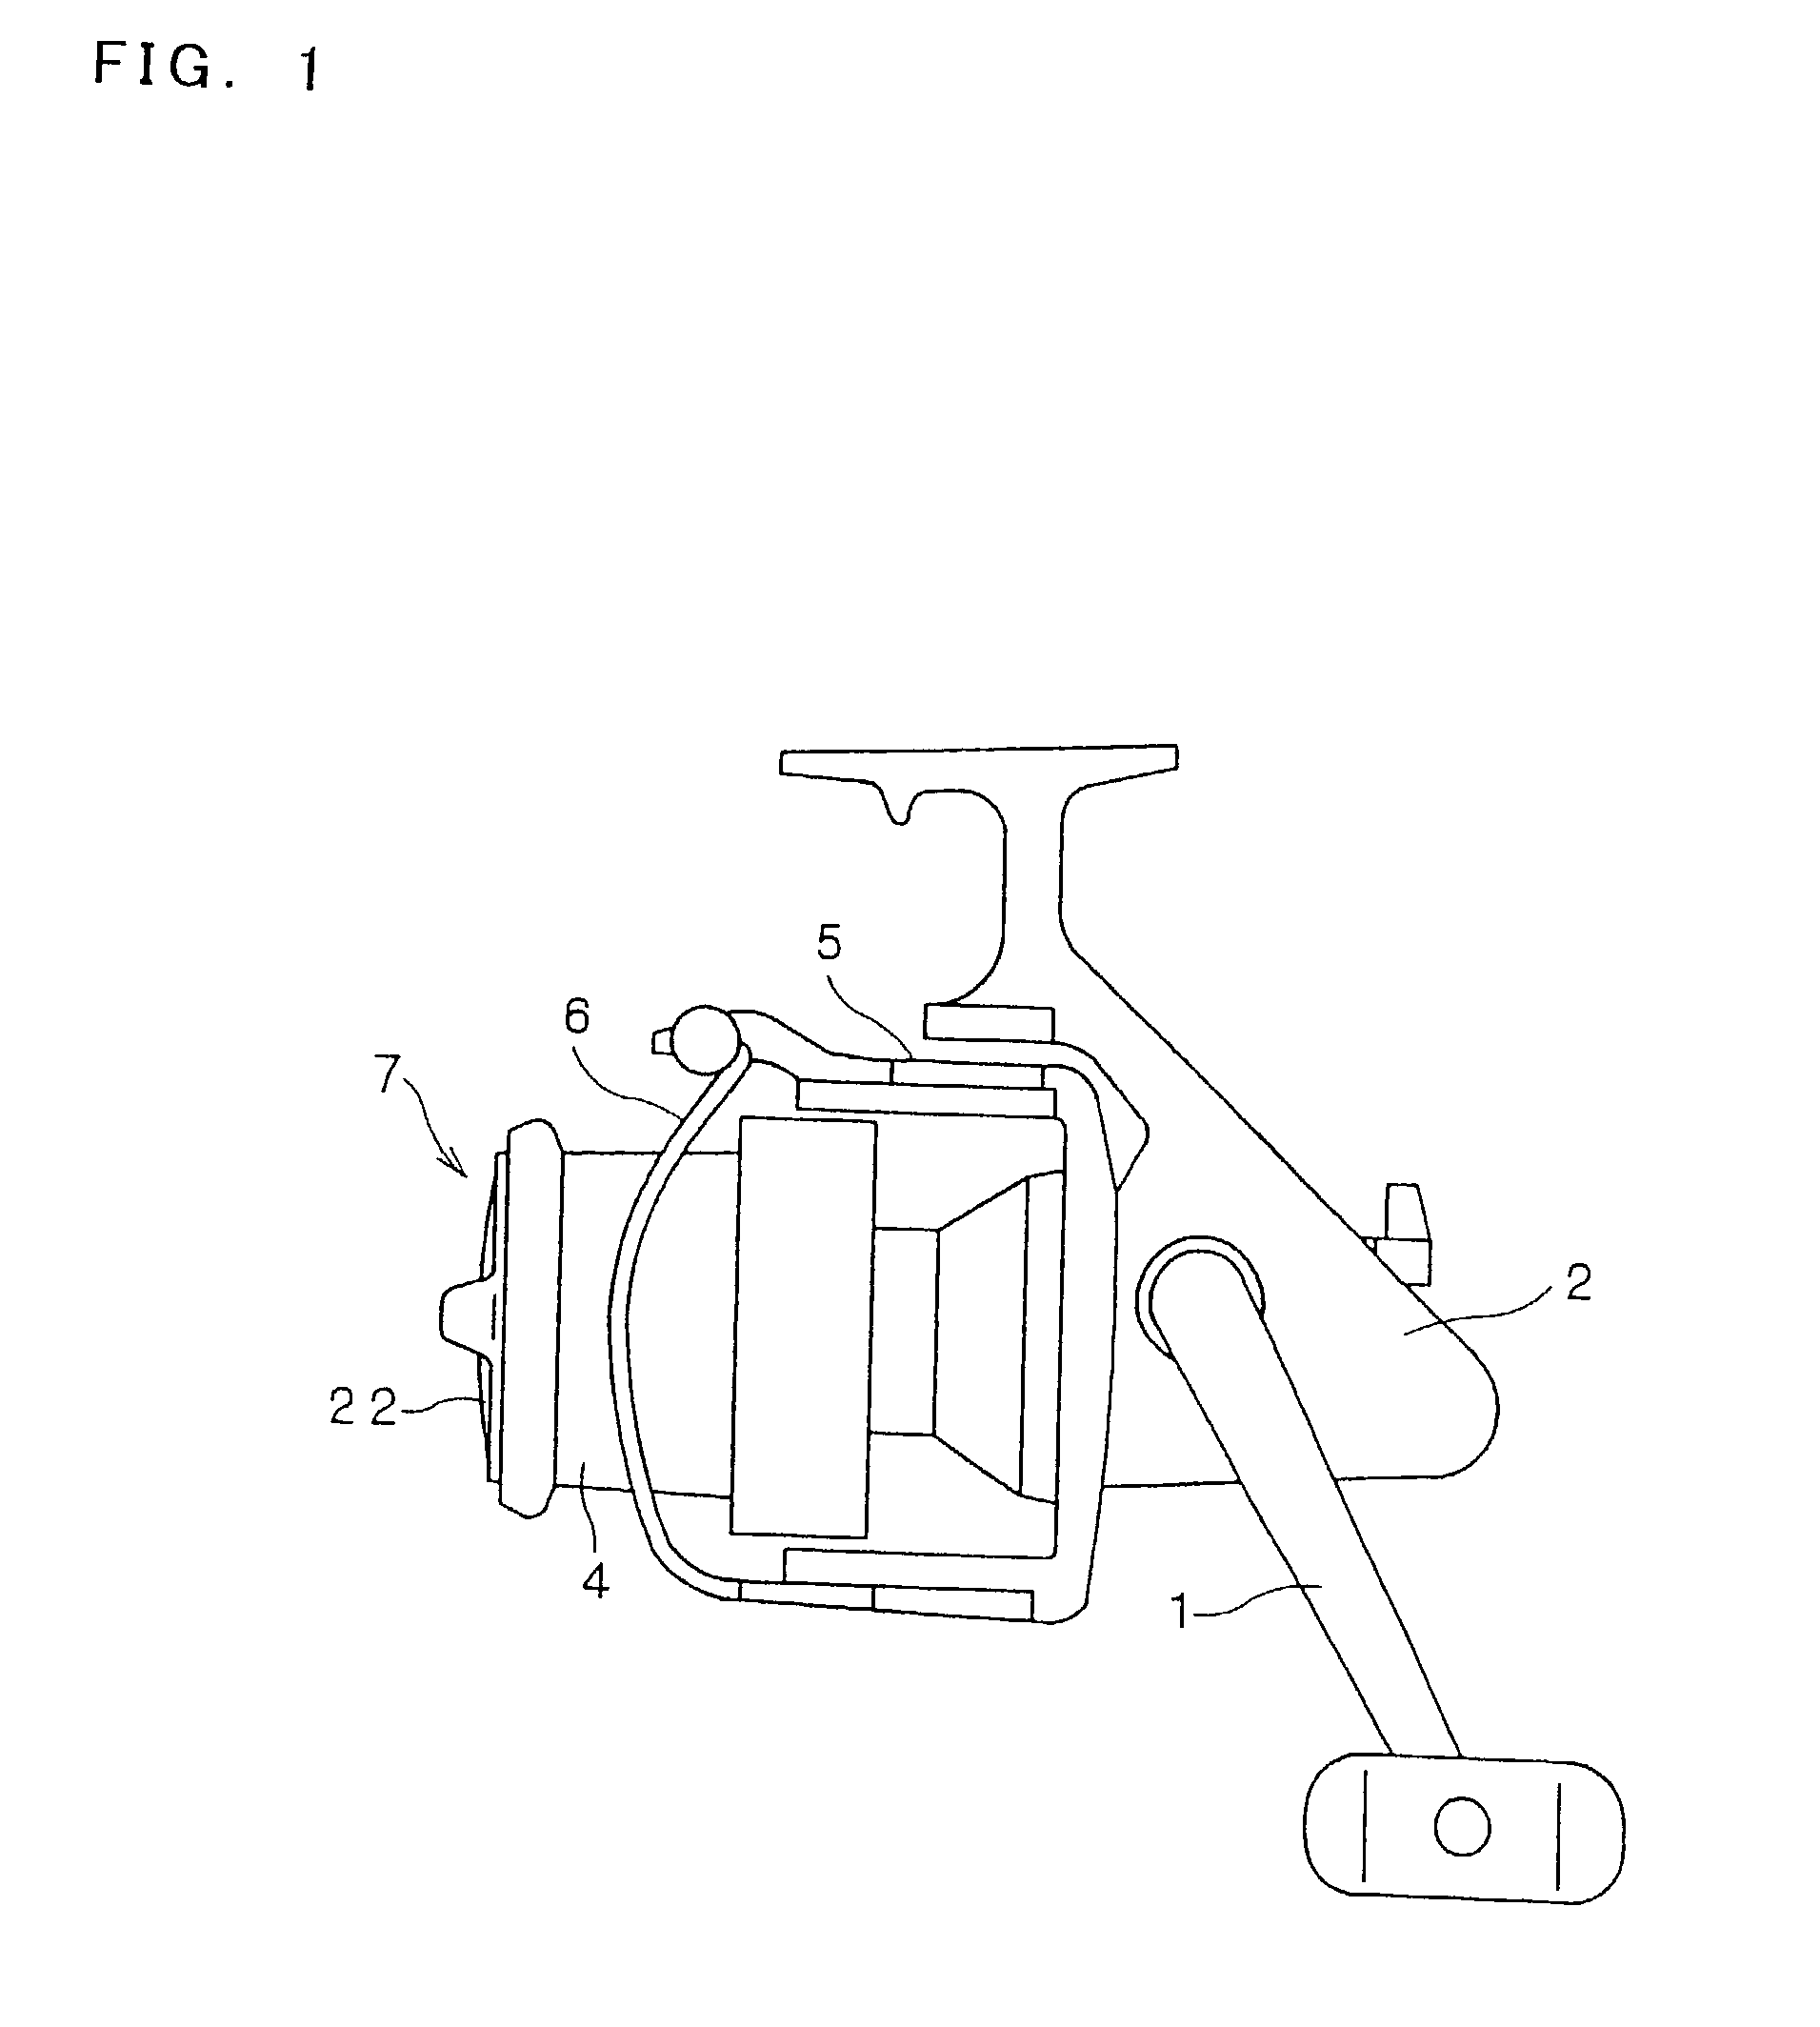 Drag washer of reel for fishing and reel for washing using the same